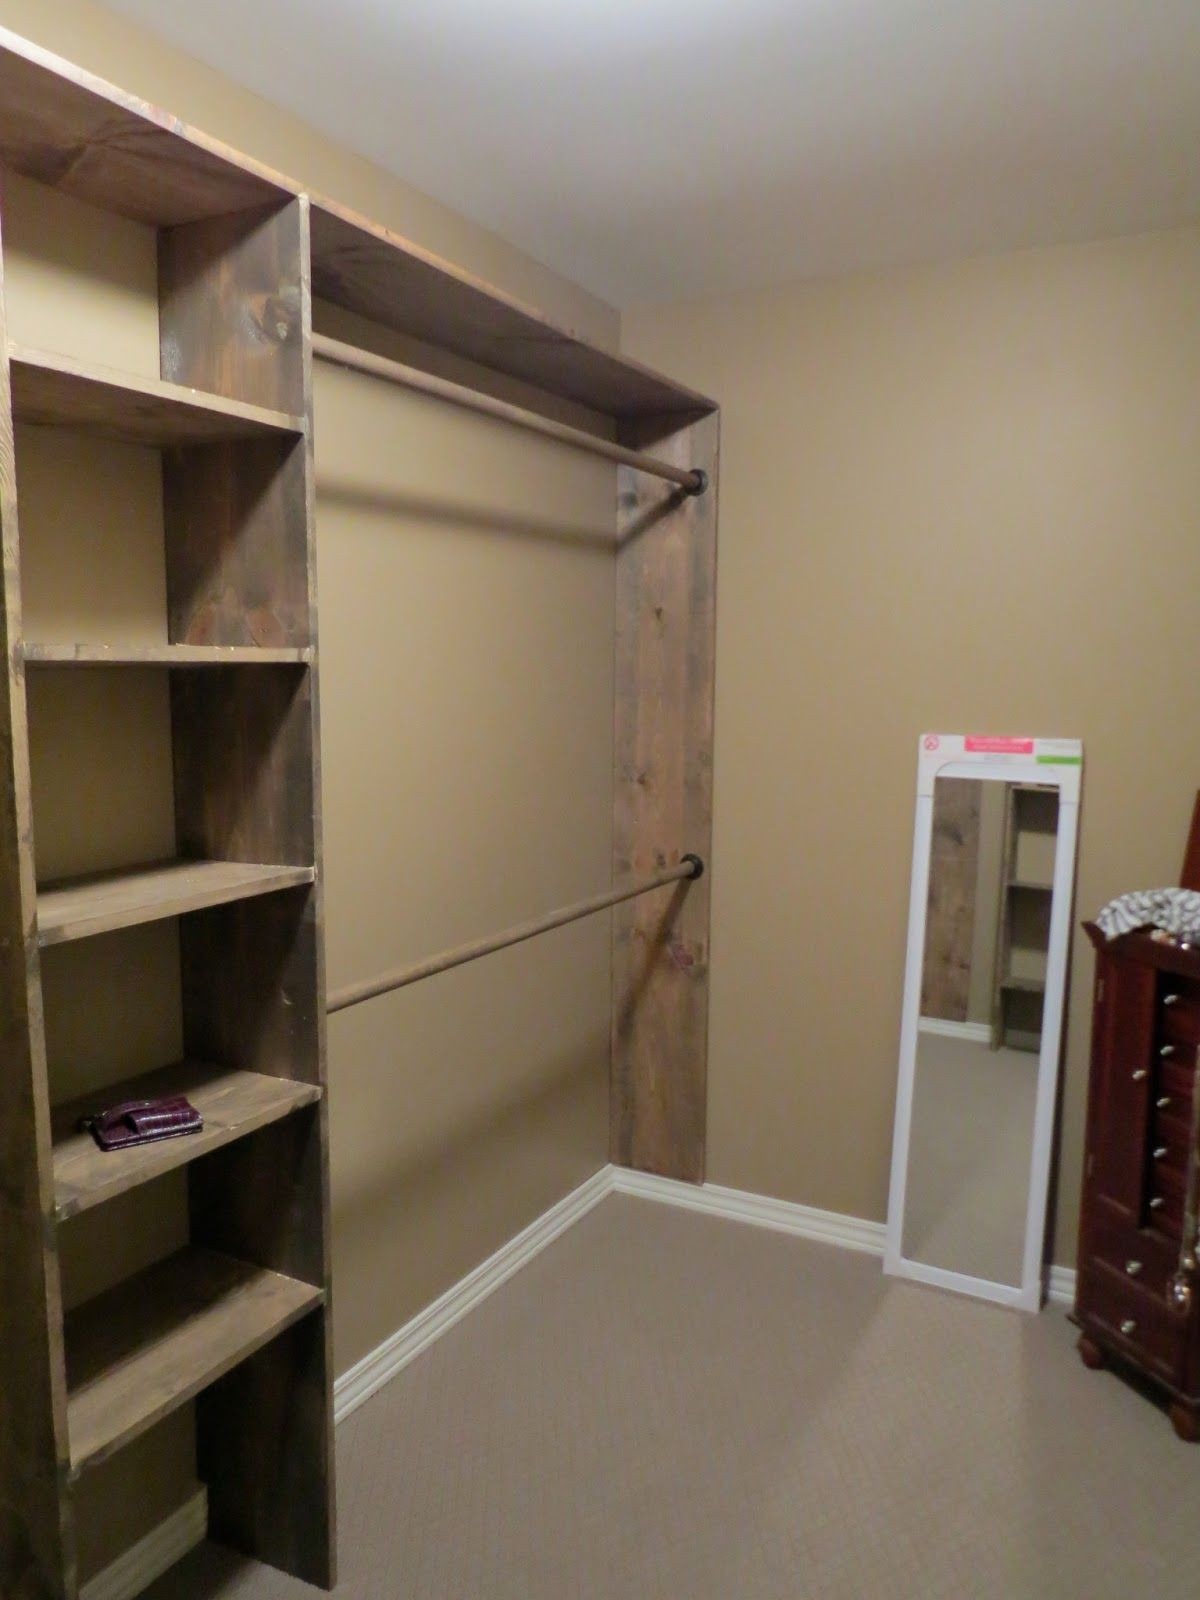 DIY Walk In Closet Plans
 Let s Just Build a House Walk in closets No more living